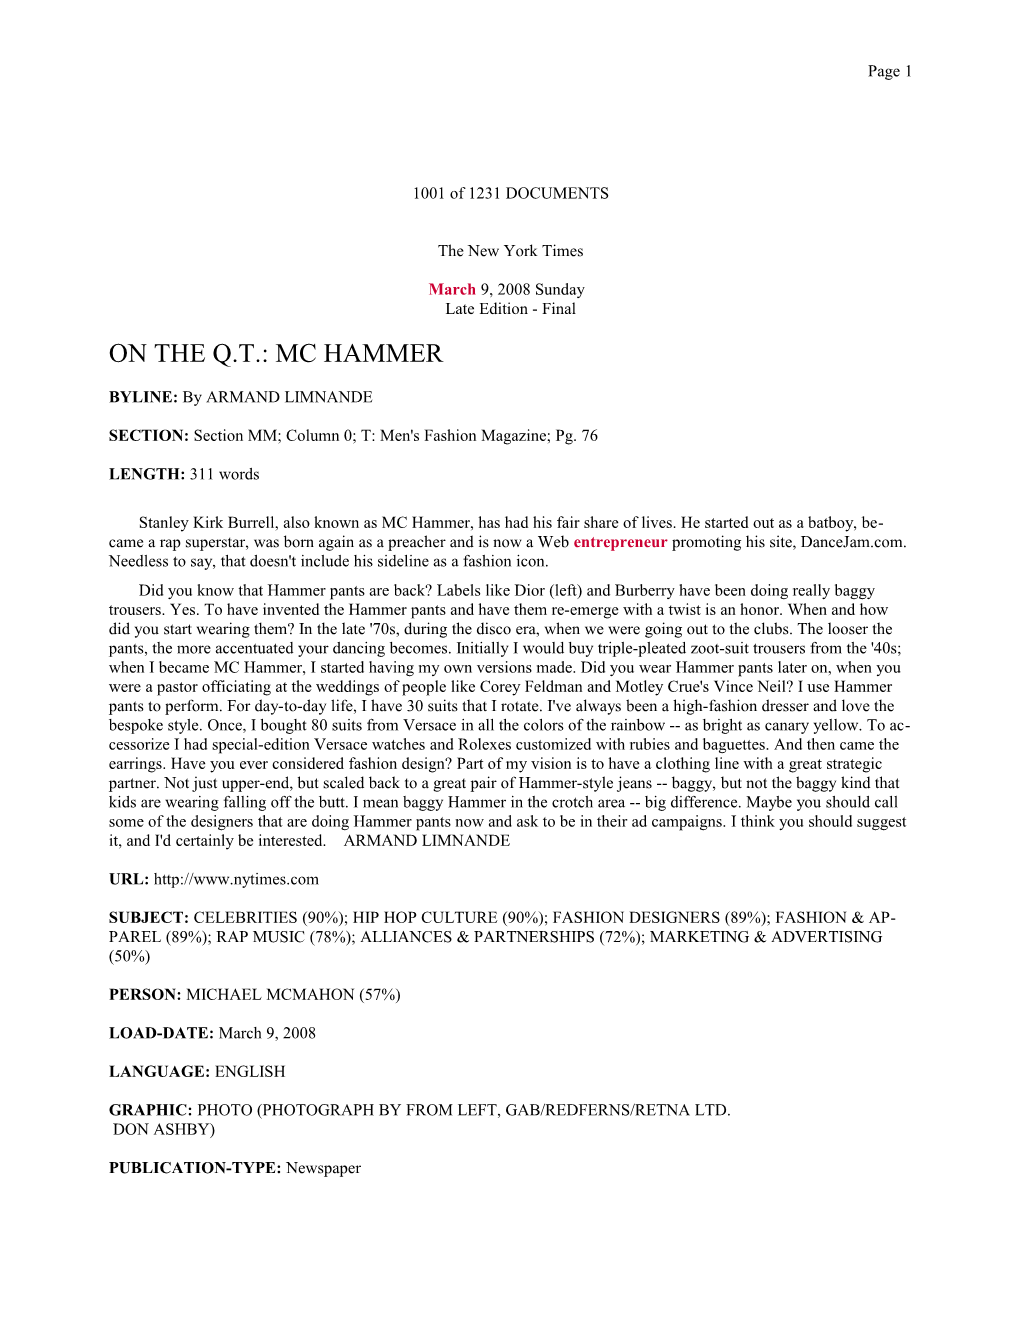 ON the Q.T.: MC HAMMER the New York Times March 9, 2008 Sunday